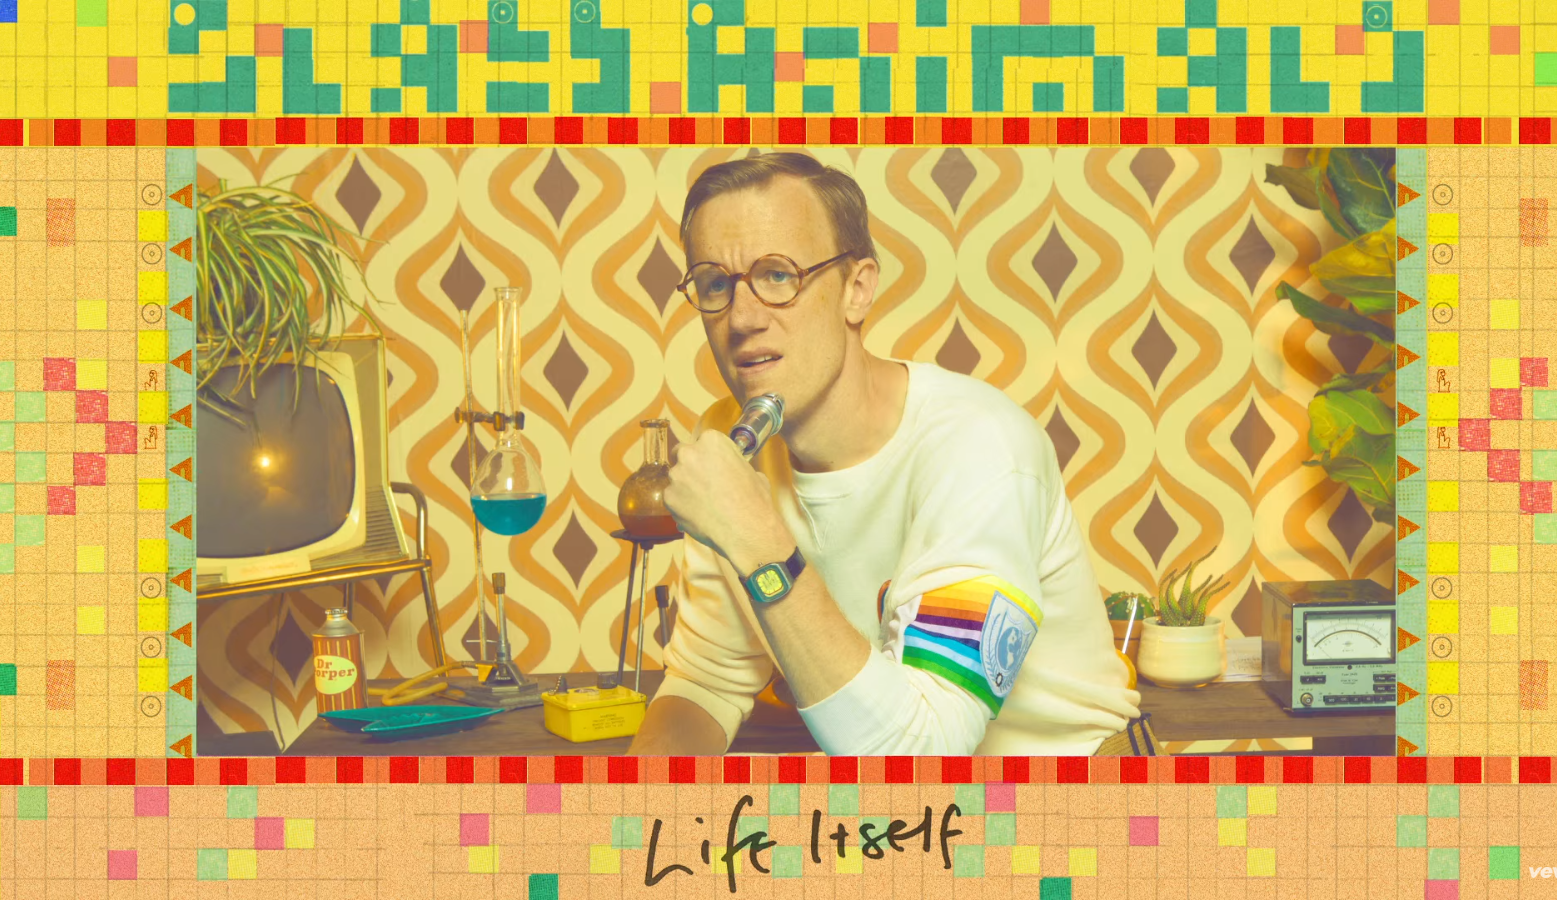 Screenshot from "Life Itself" by Glass Animals